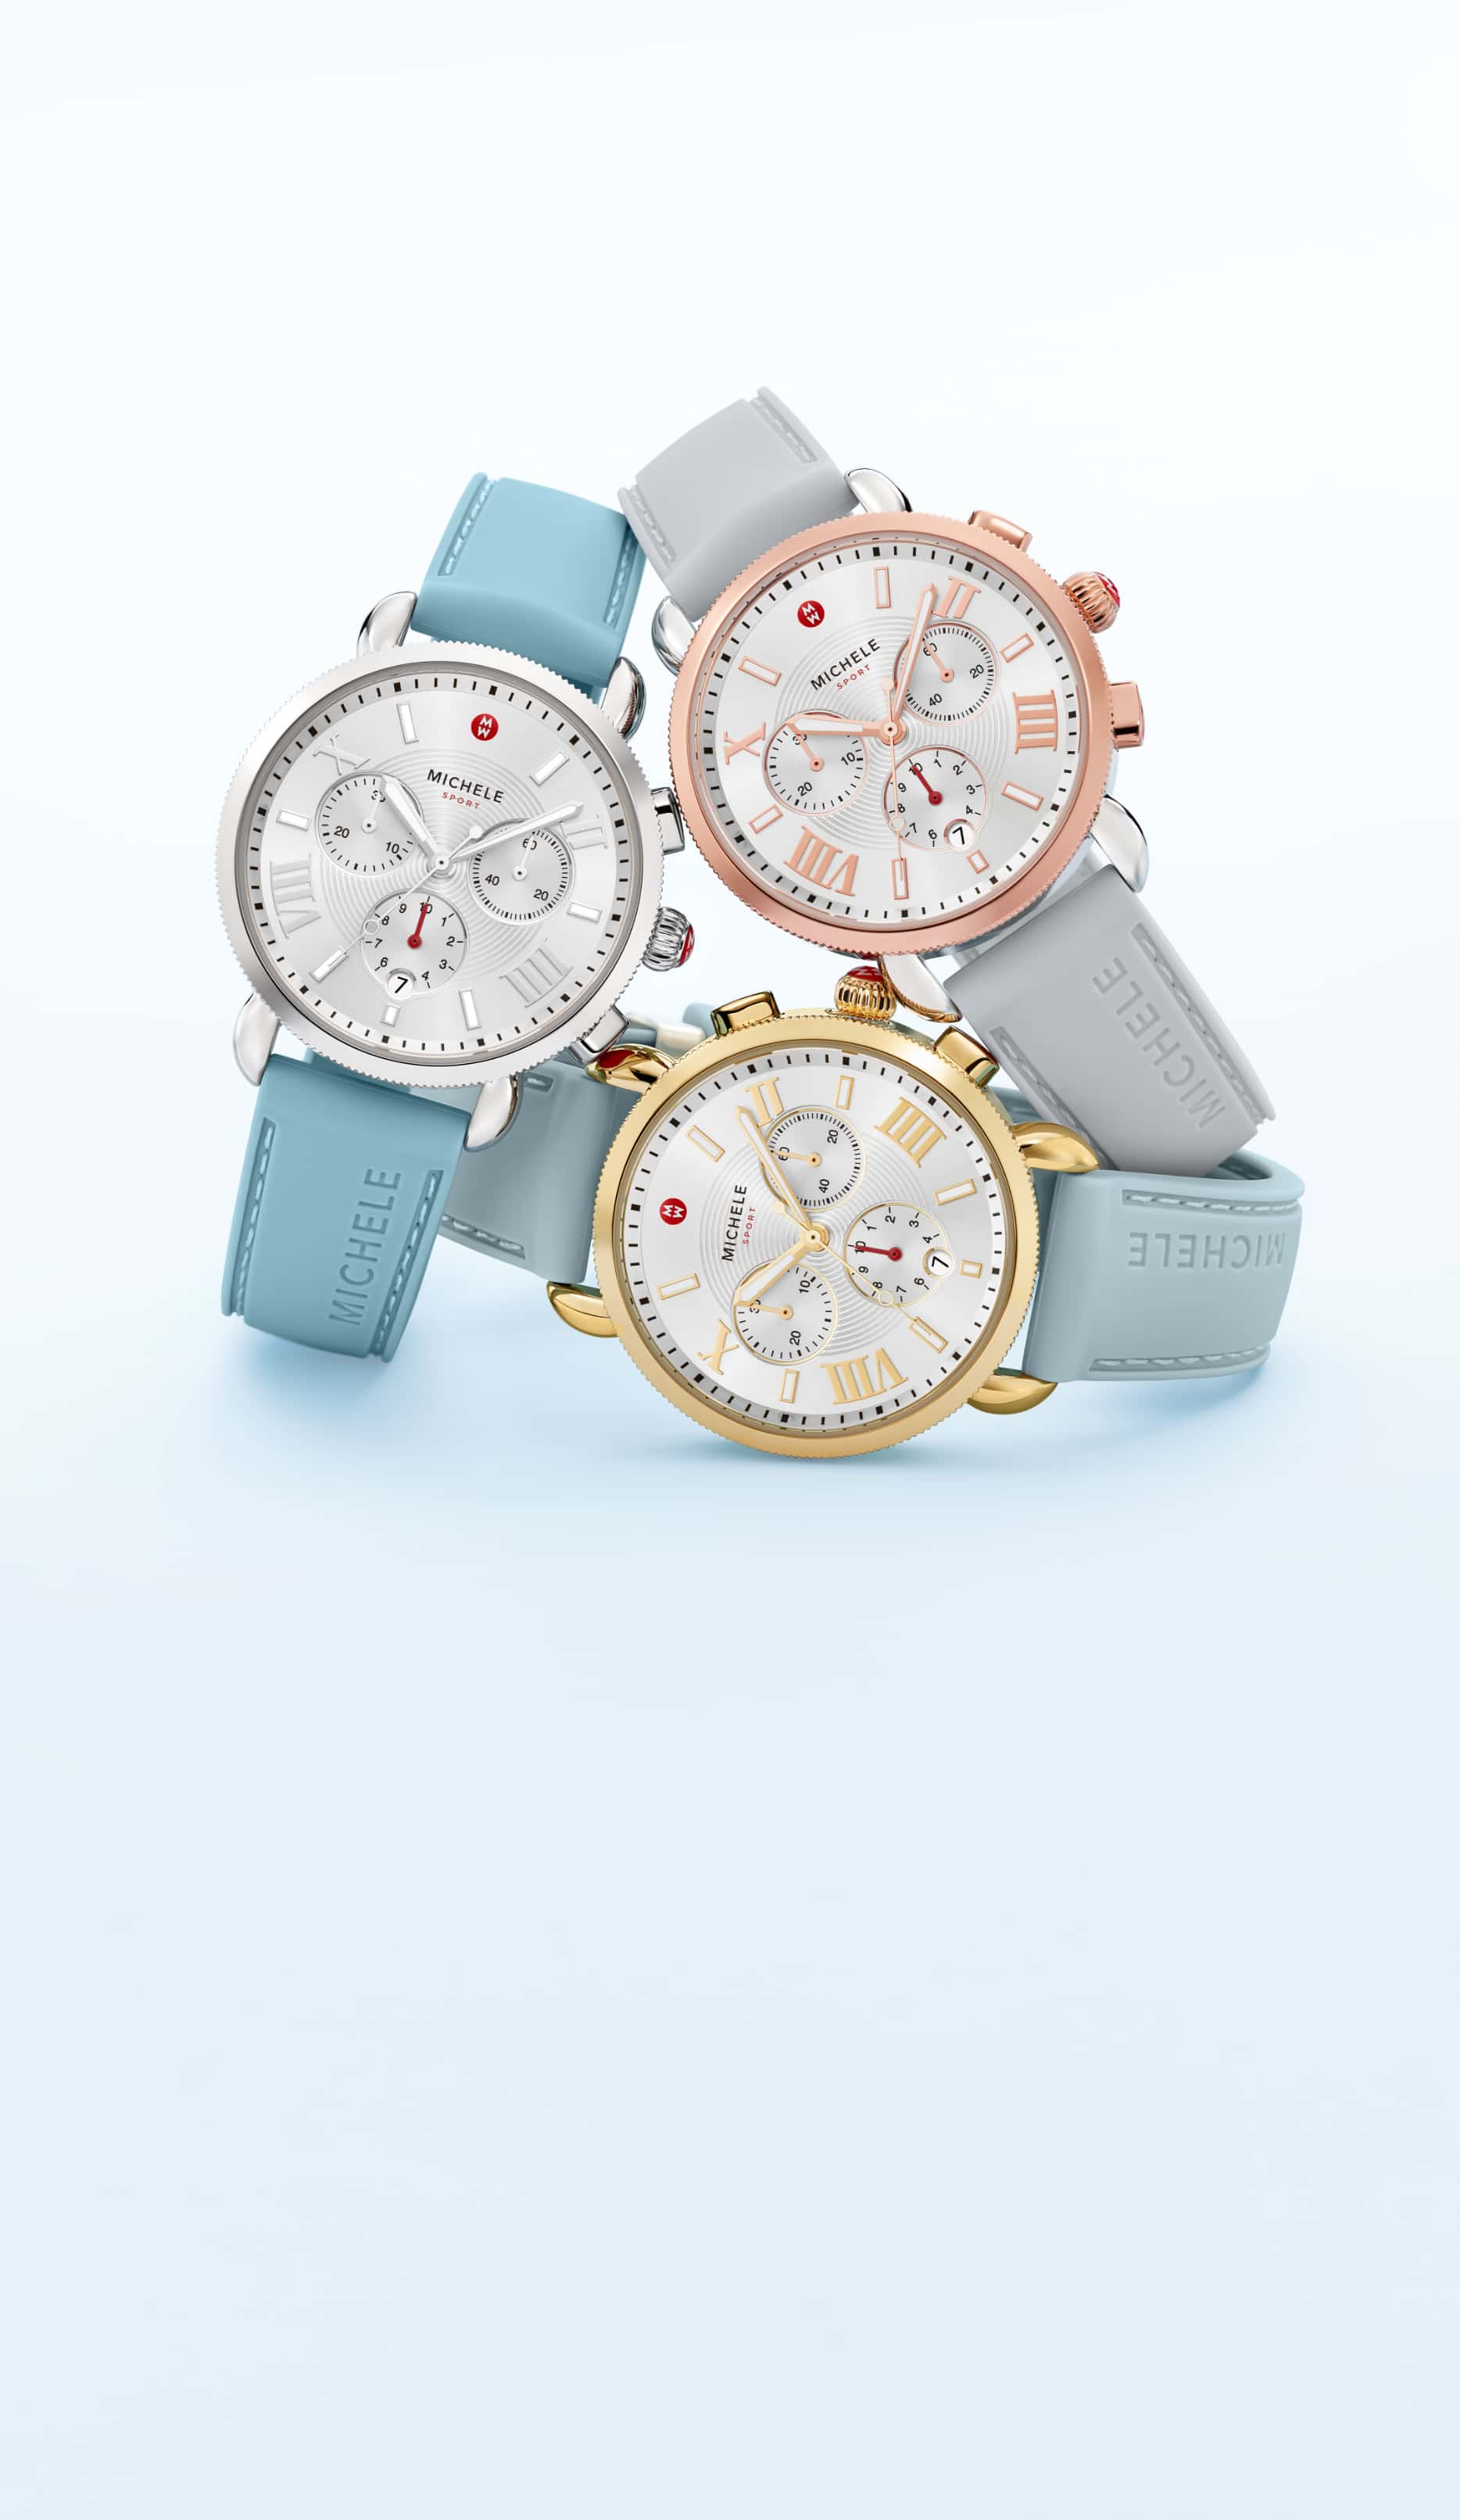 Taking cues from chic sportswear designs on the runway, MICHELE Sport watches offer a high-fashion way to elevate your everyday.